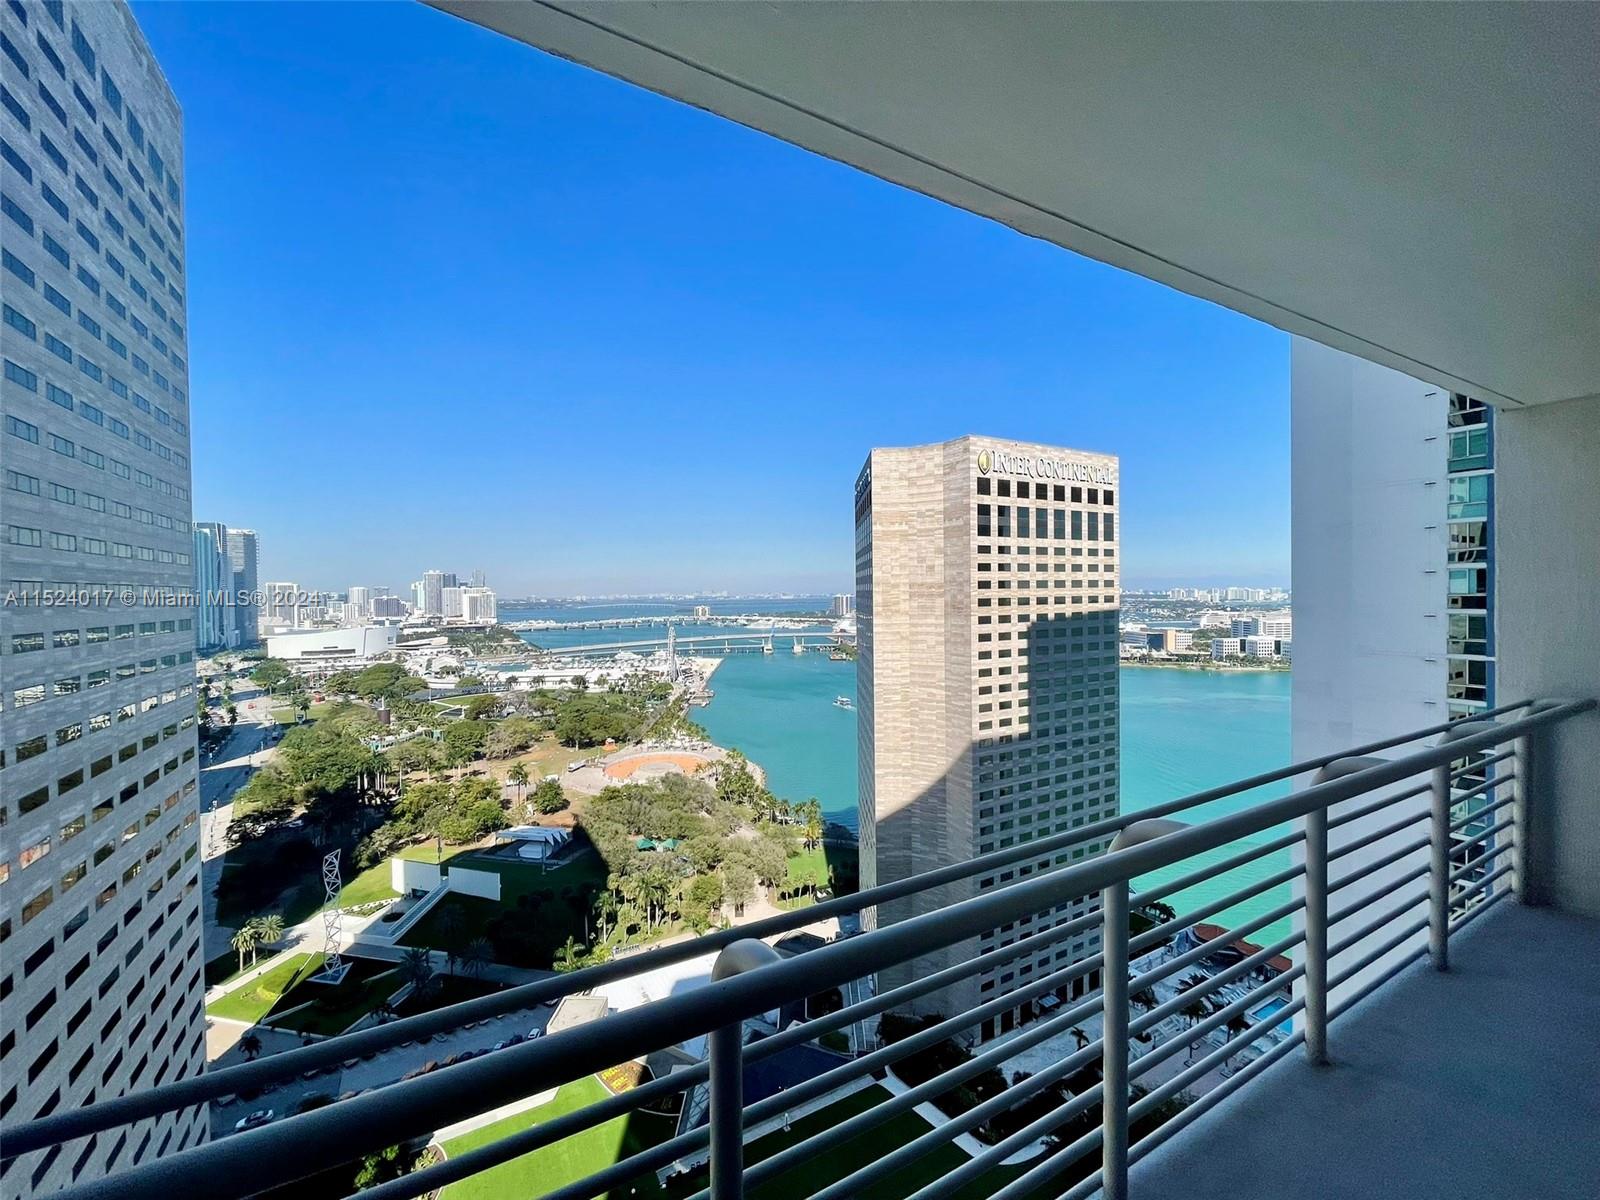 Indulge in breathtaking bay views from this exquisite condo situated on the 31st floor at One Miami. This one-bedroom, one-bathroom apartment boasts Italian wood kitchen cabinets, granite countertops, and stainless steel appliances complemented by a luxurious marble countertop bath and a spacious walk-in closet. Elevate your lifestyle with a plethora of amenities designed for your pleasure, including two sparkling swimming pools, two state-of-the-art fitness centers, a rejuvenating jacuzzi, invigorating saunas, a welcoming community room, and the peace of mind provided by 24-hour security and concierge services. Additionally, enjoy the convenience of on-site features such as a valet parking service, a business center, and a convenience store.